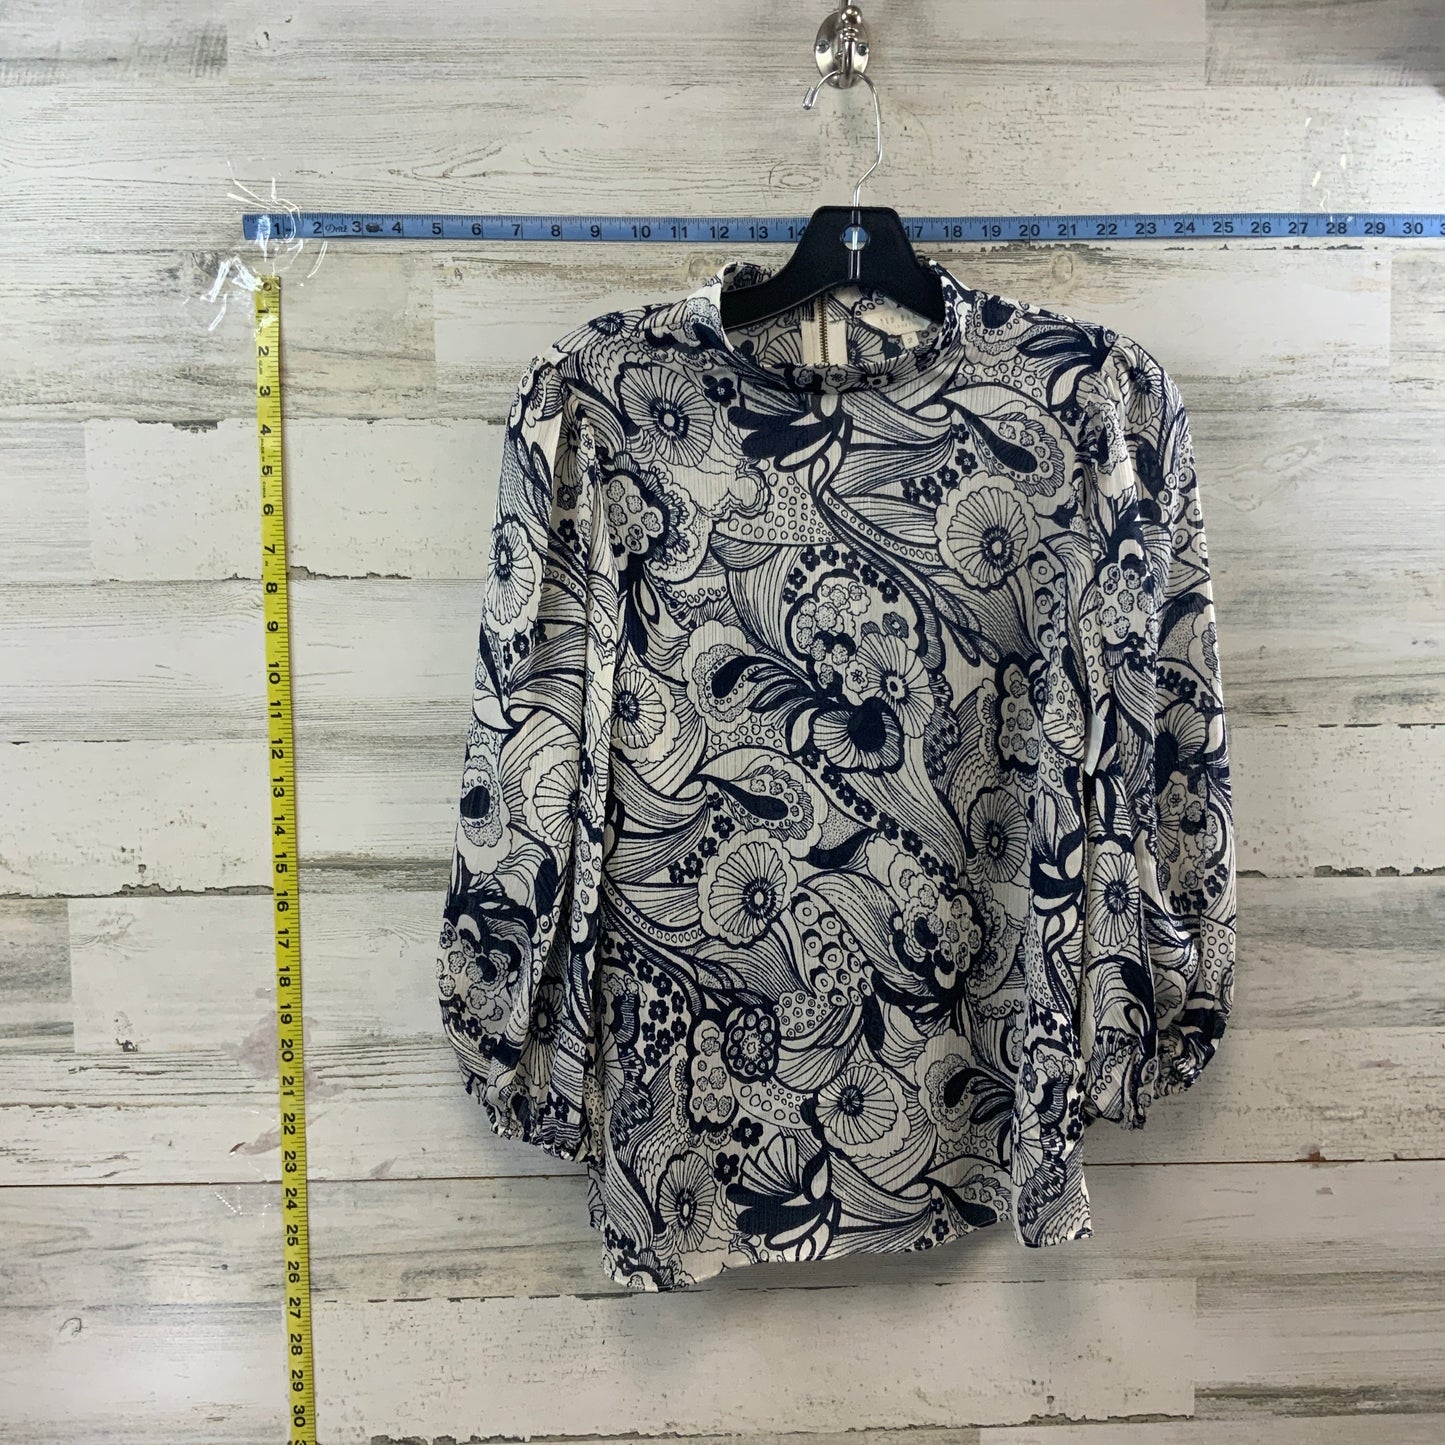 Top 3/4 Sleeve By Ted Baker  Size: S